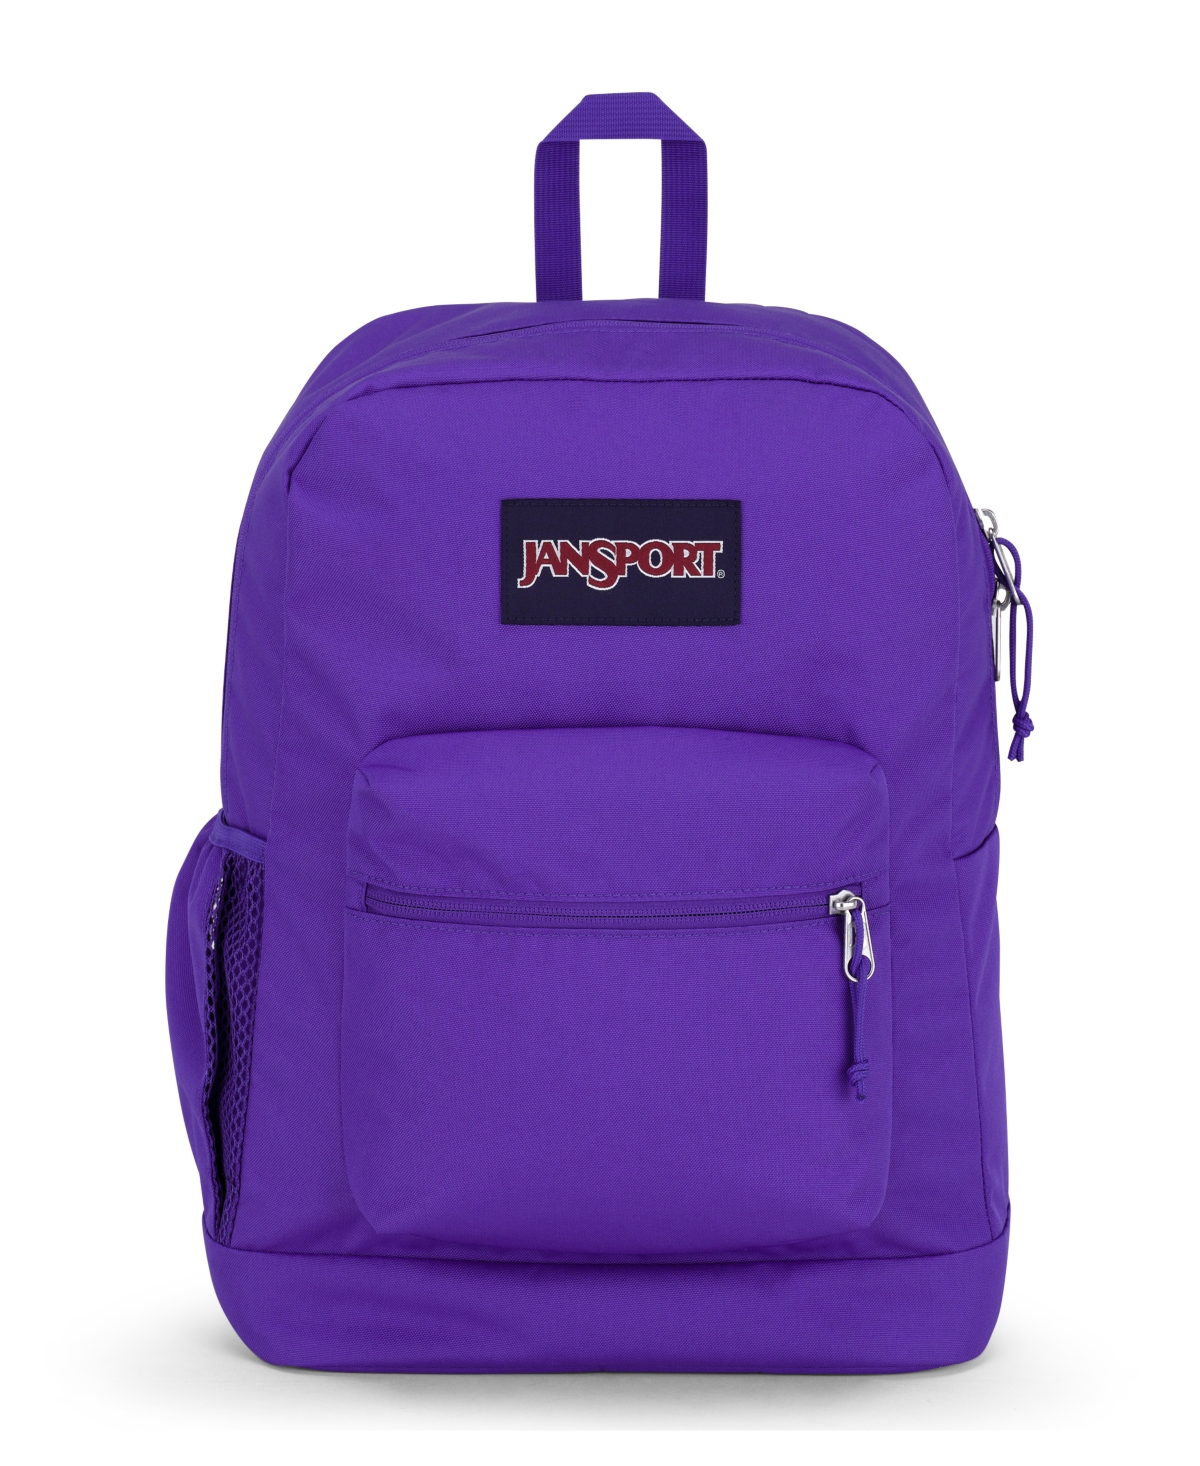 Jansport Cross Town Plus Backpack In Party Plum